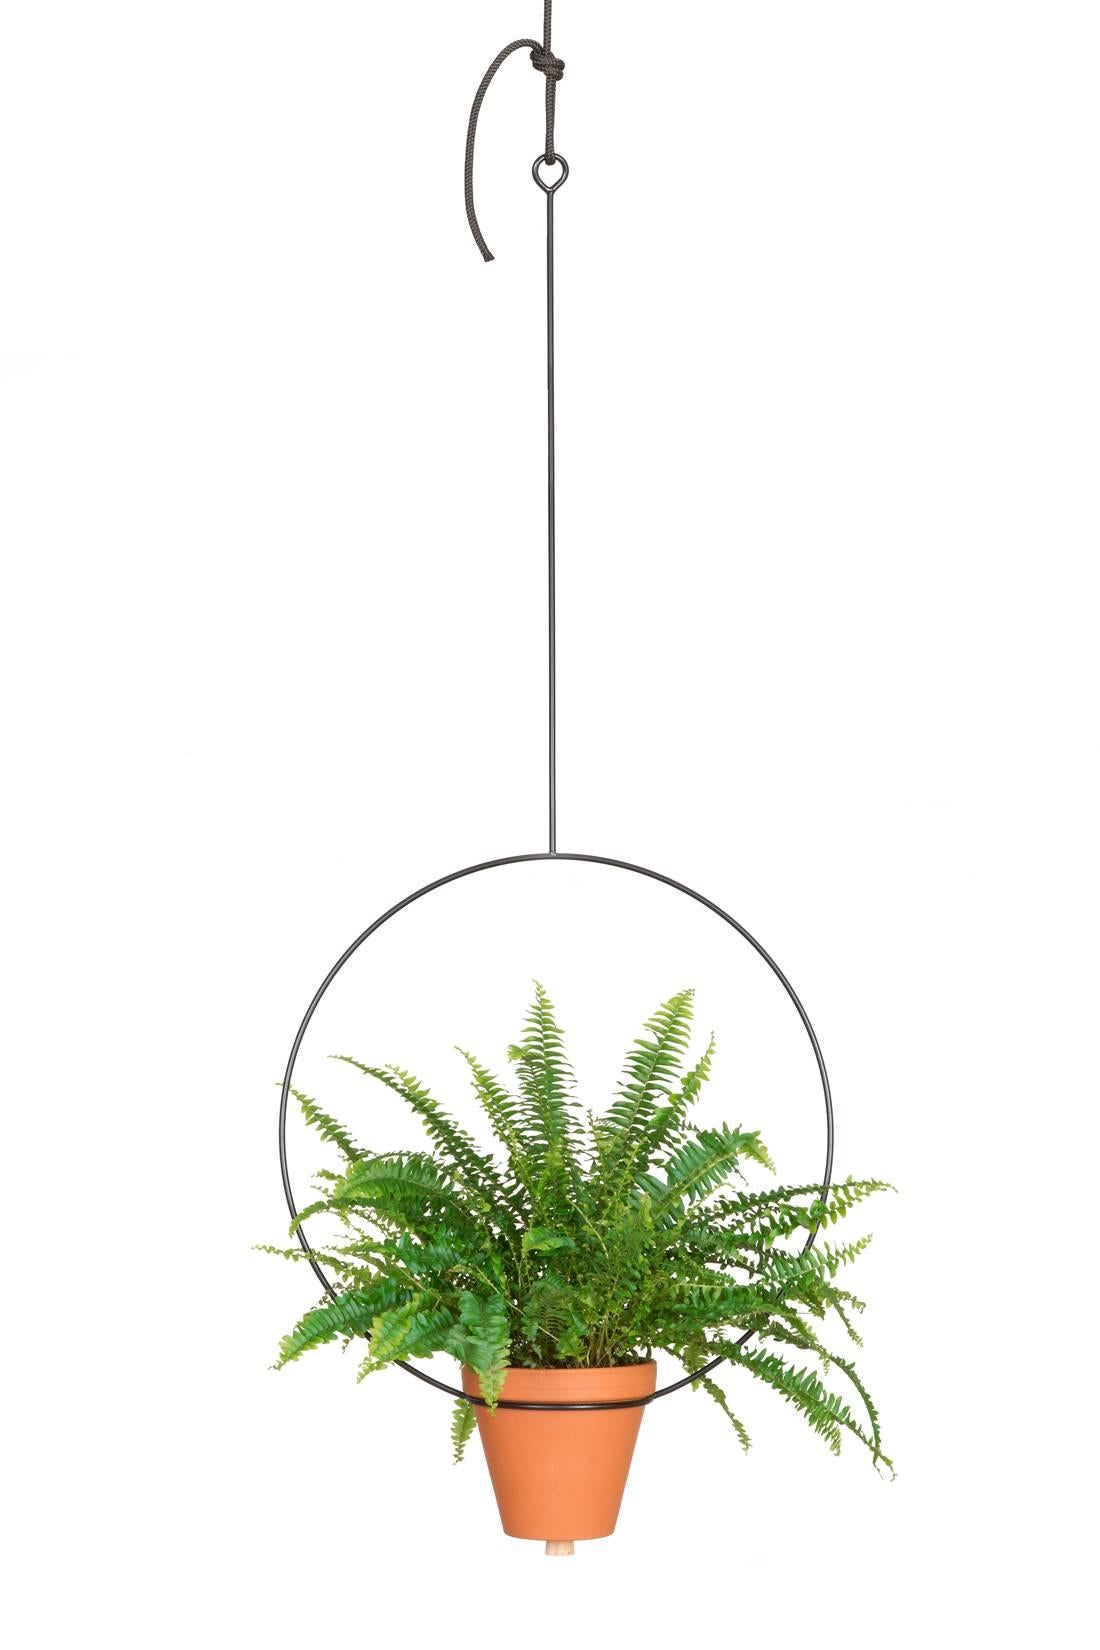 The right frame: Theo is a minimalistic exoskeletons in the form of a circle designed to hold your differently sized potted plants. Theo is made of powder coated steel in black and is available in the three basic forms: circle, triangle and